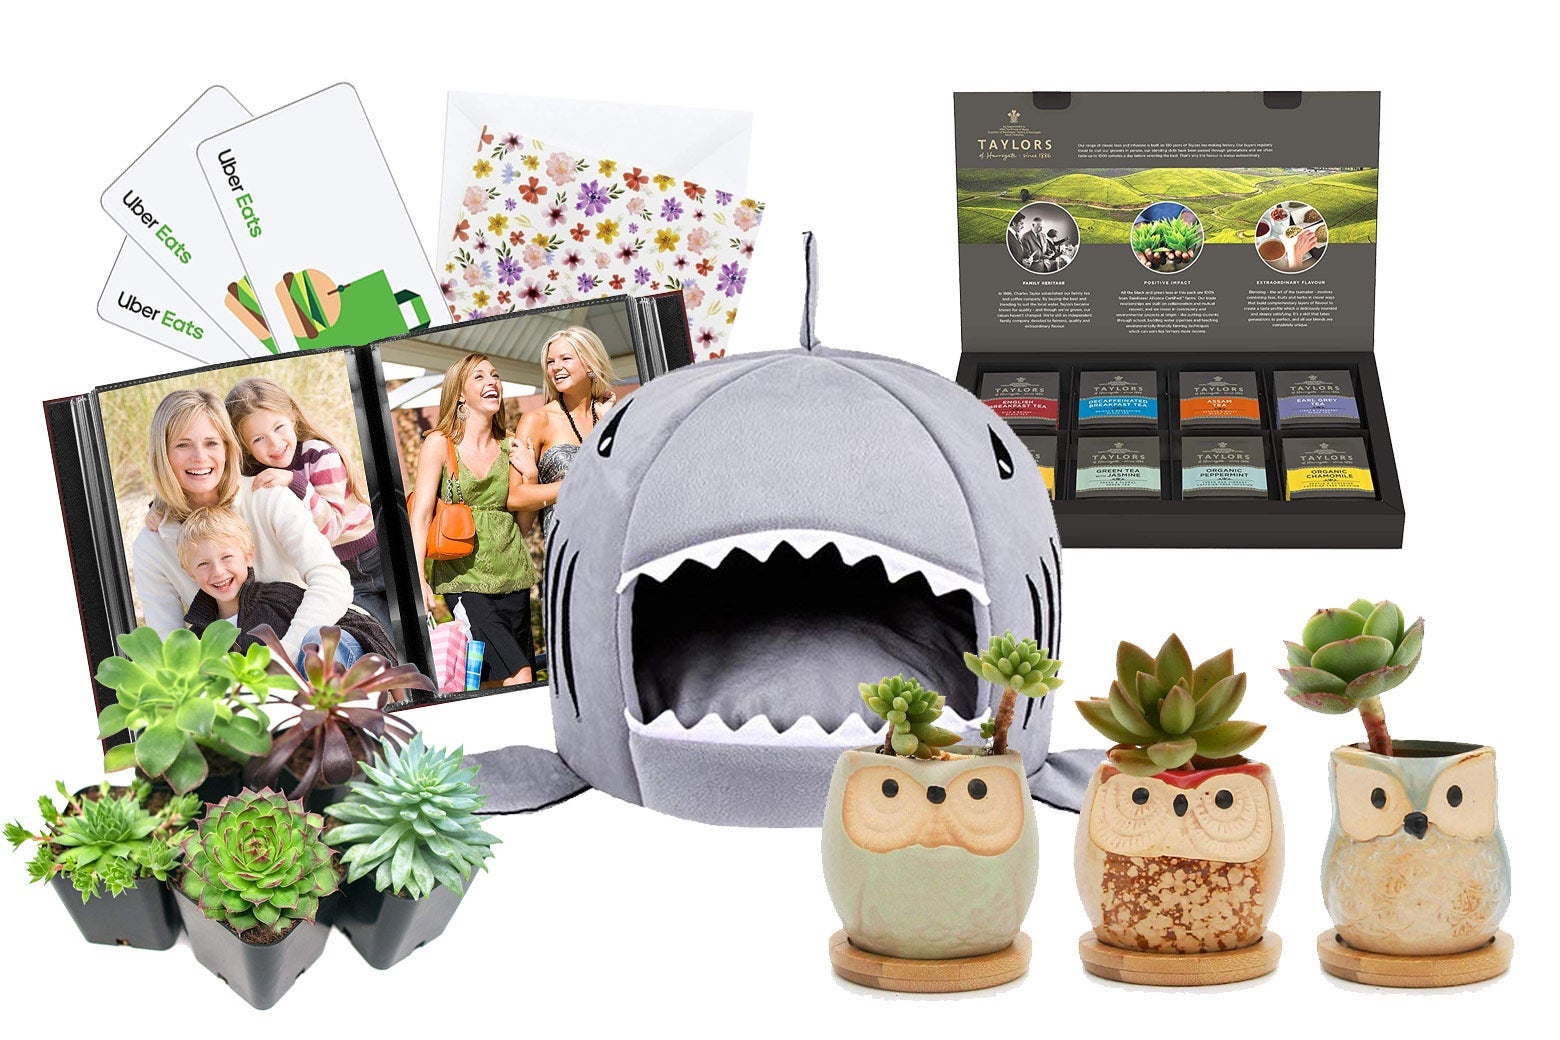 Uber Eats gift cards, greeting cards, photo album, shark cat bed, tea variety box, succulents in planters.